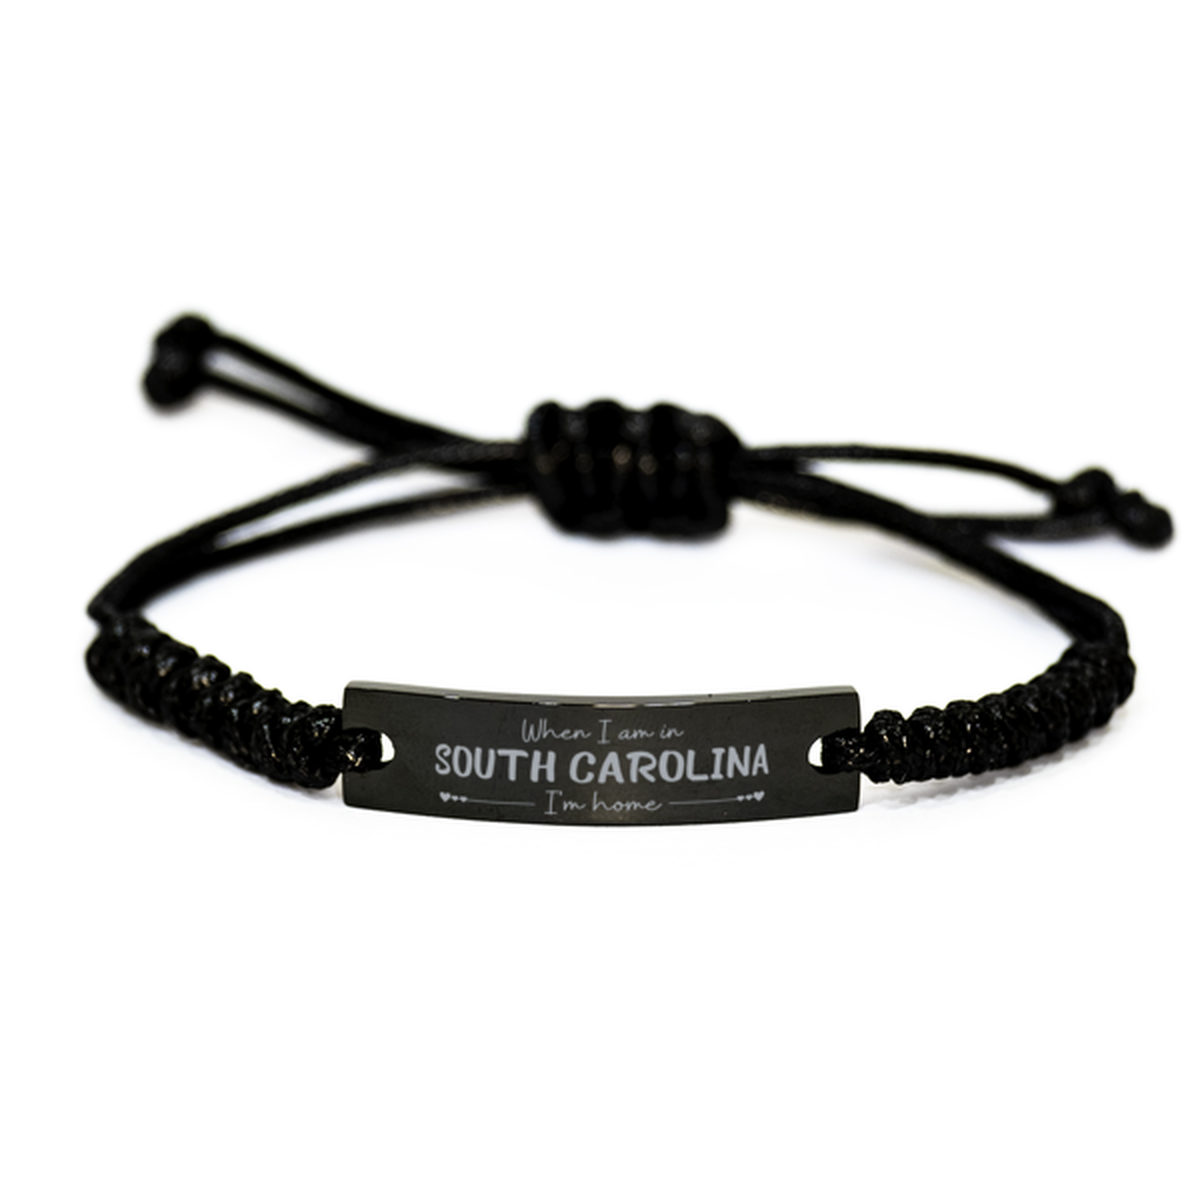 When I am in South Carolina I'm home Black Rope Bracelet, Cheap Gifts For South Carolina, State South Carolina Birthday Gifts for Friends Coworker